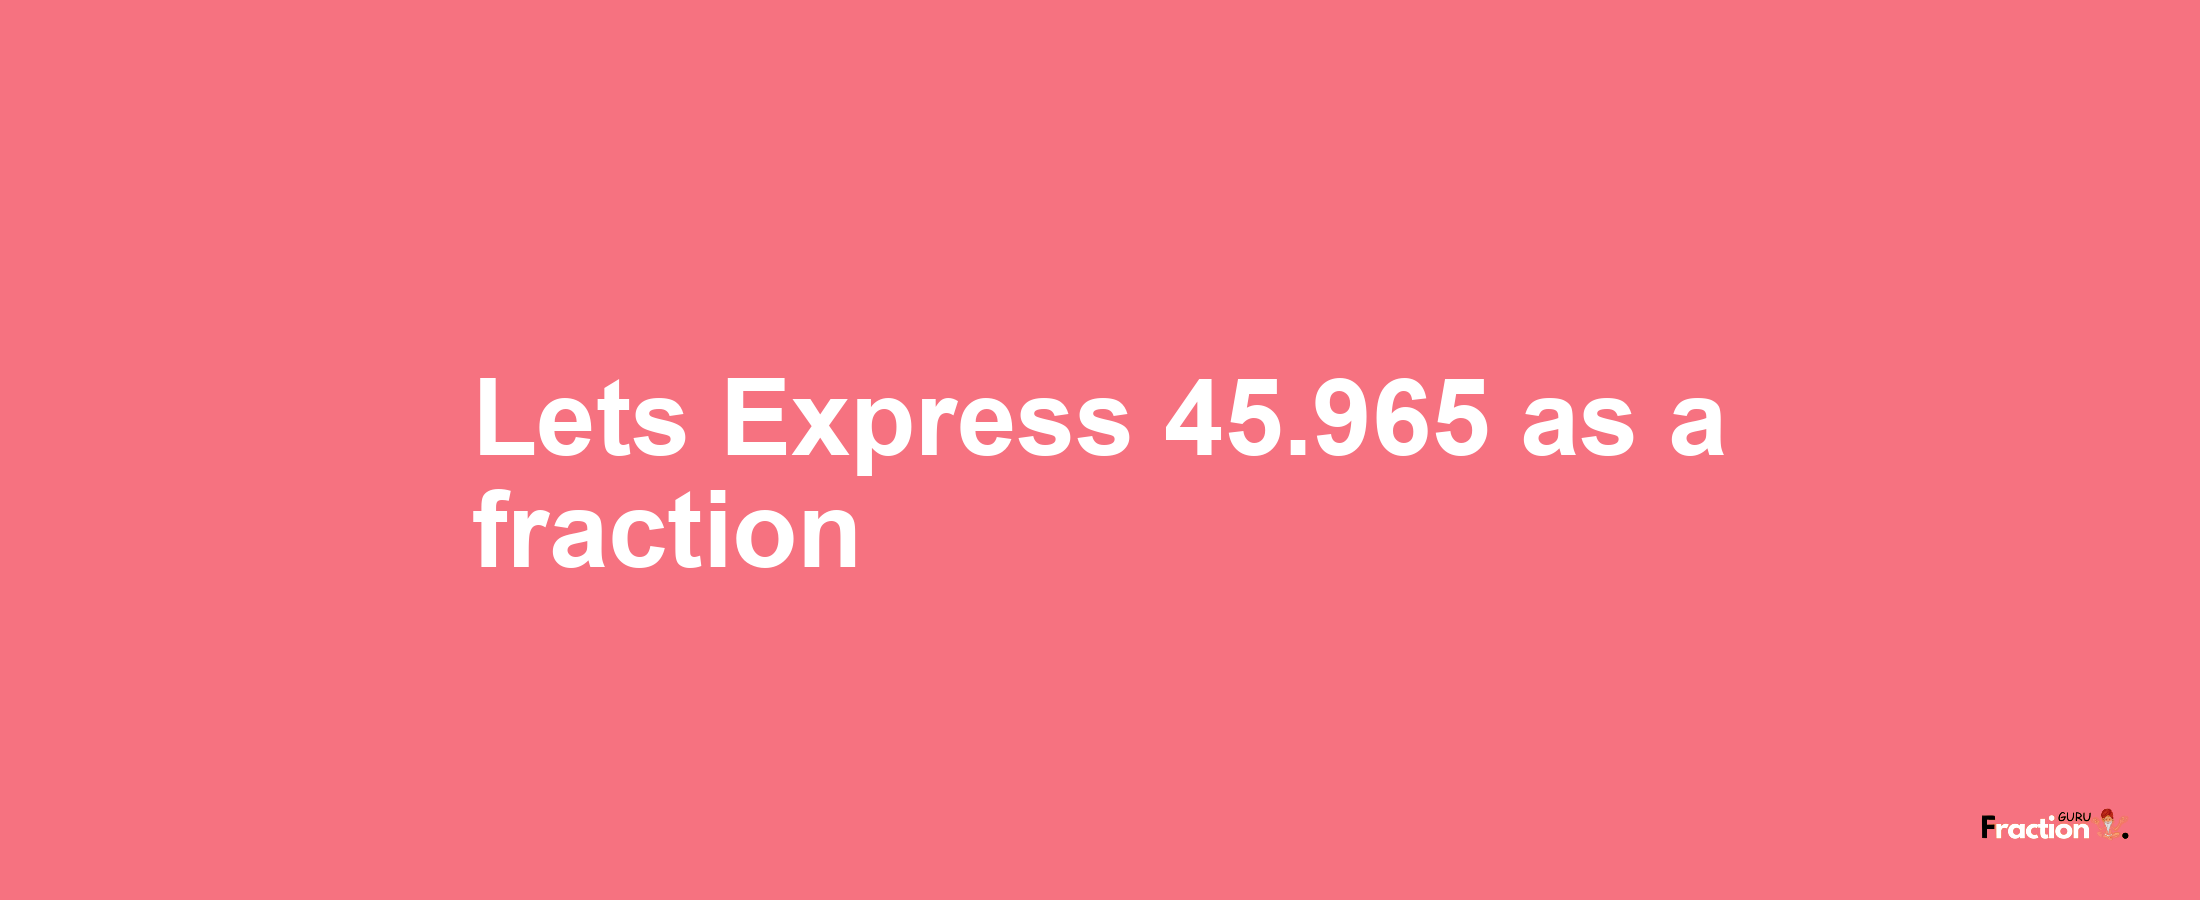 Lets Express 45.965 as afraction